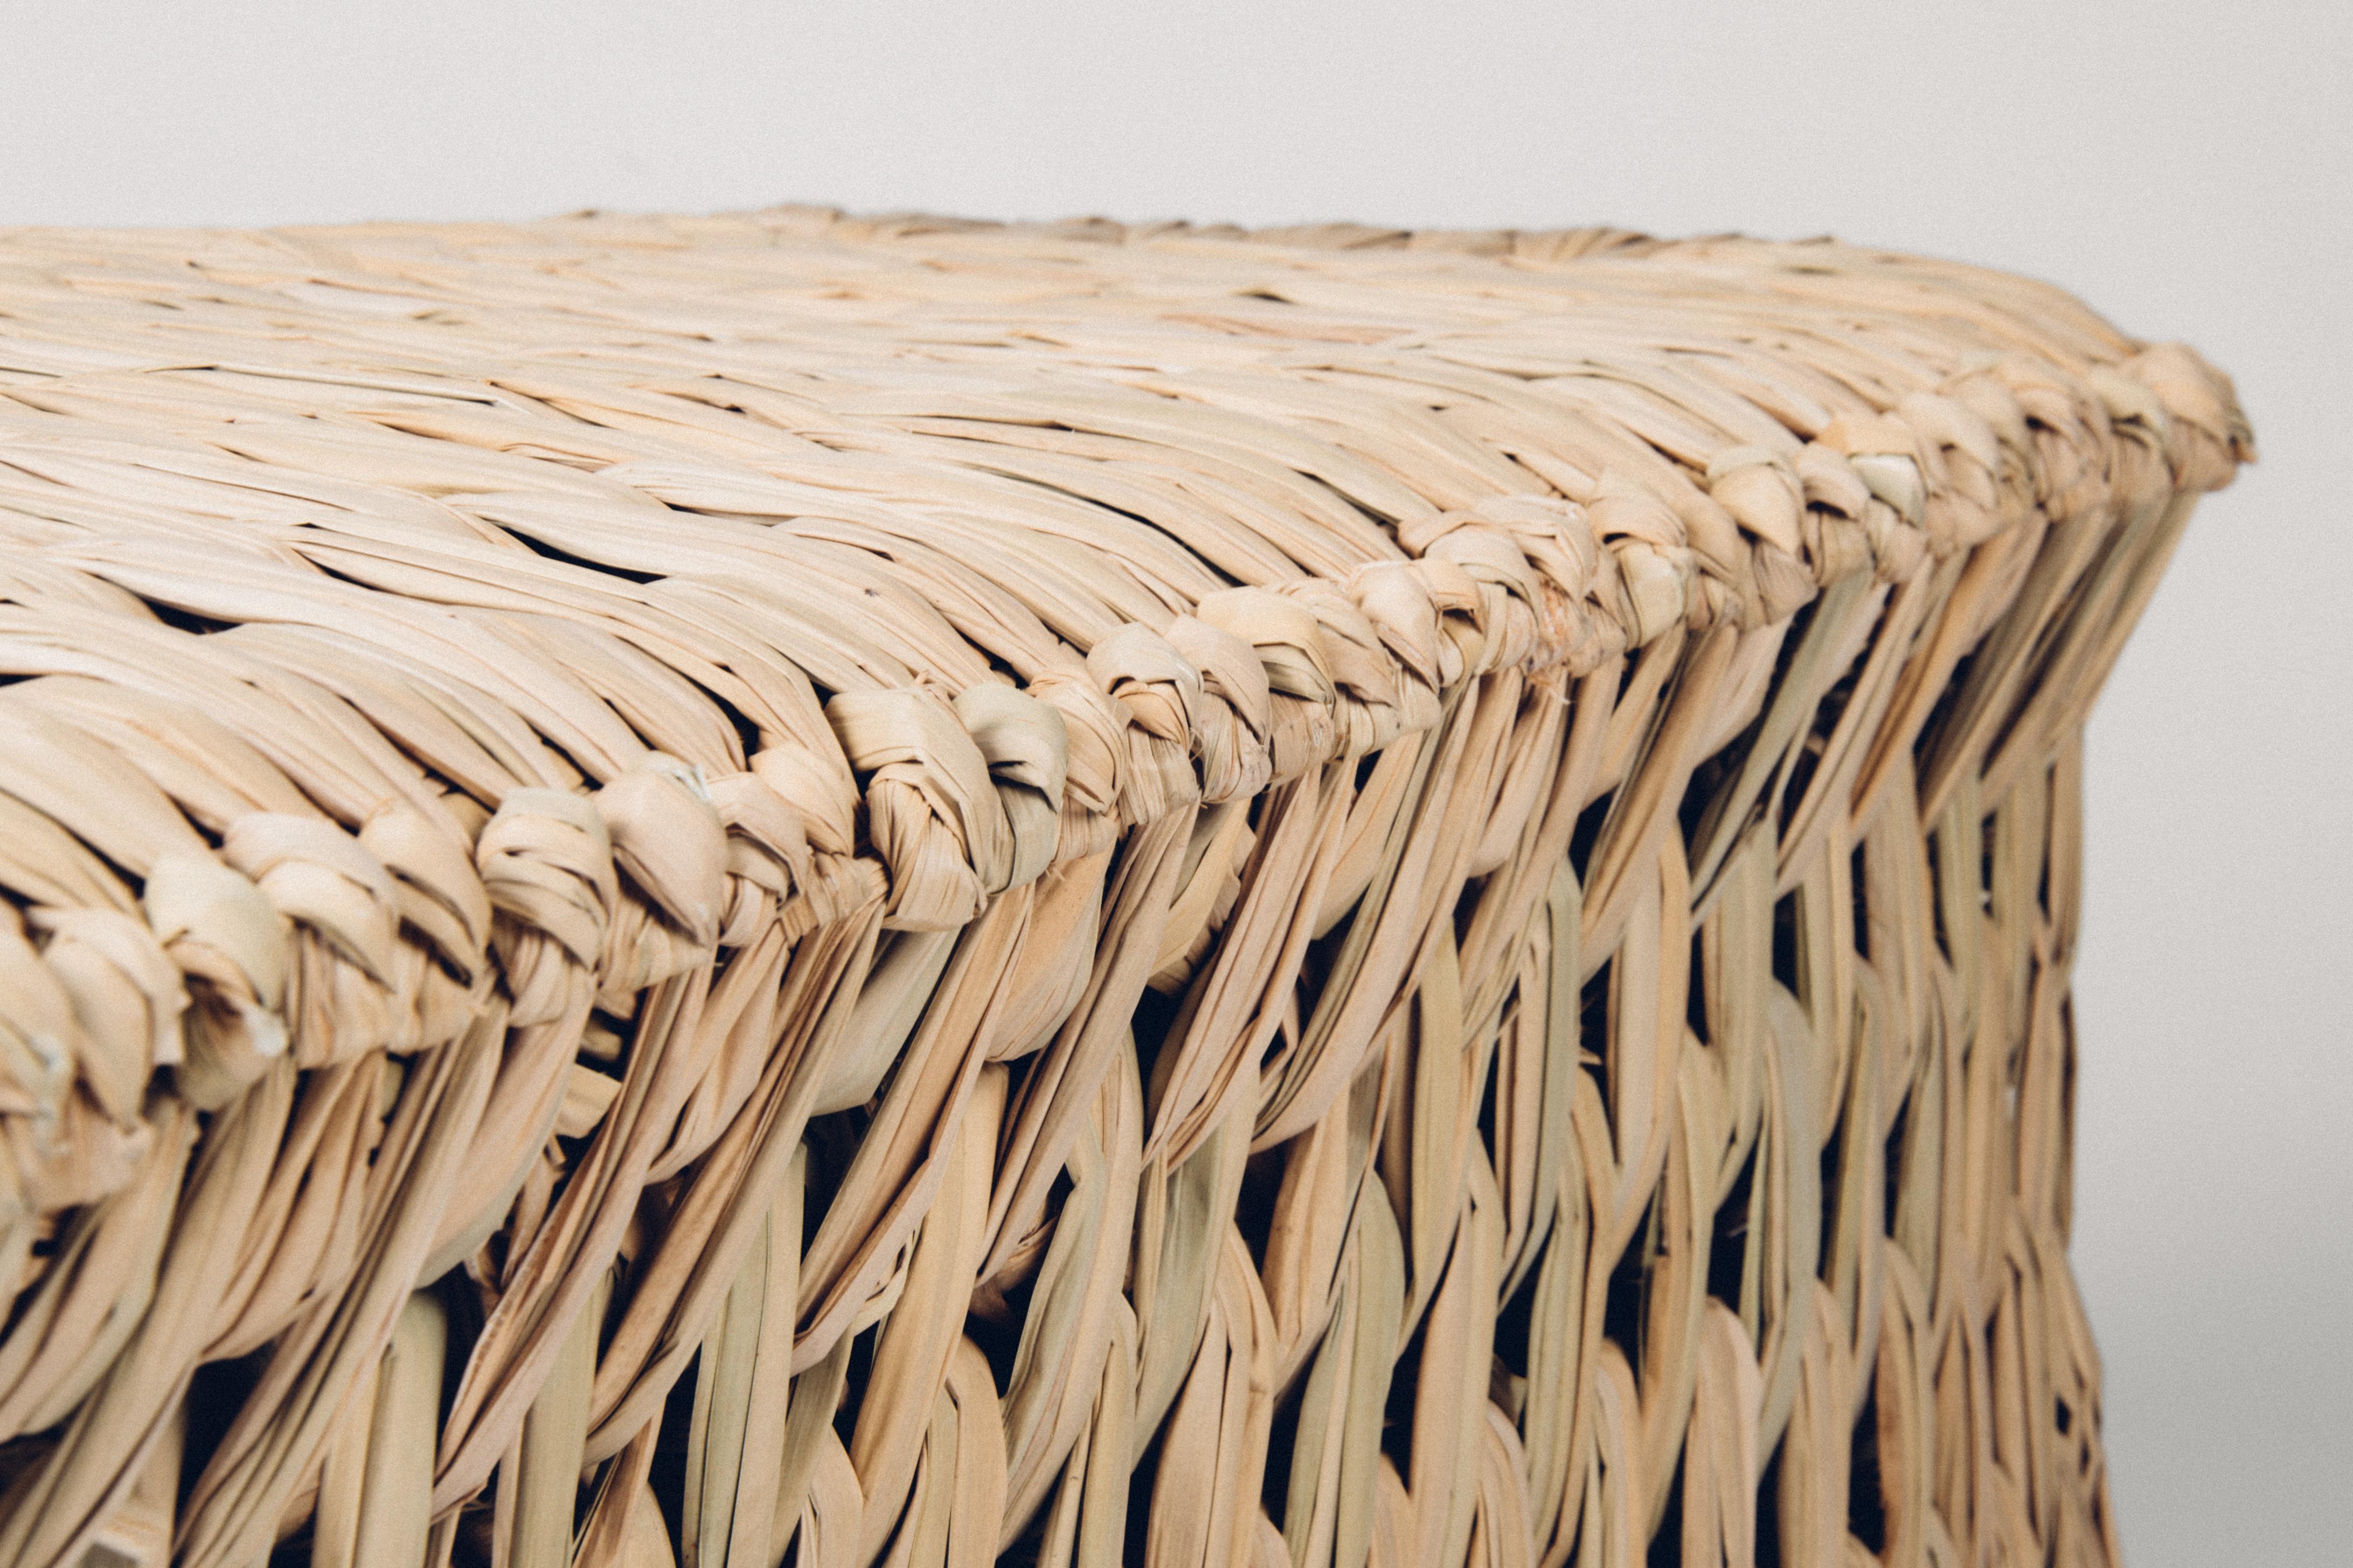 Hand-Woven Woven Tule 'Icpalli' Bench made in Mexico from LUTECA